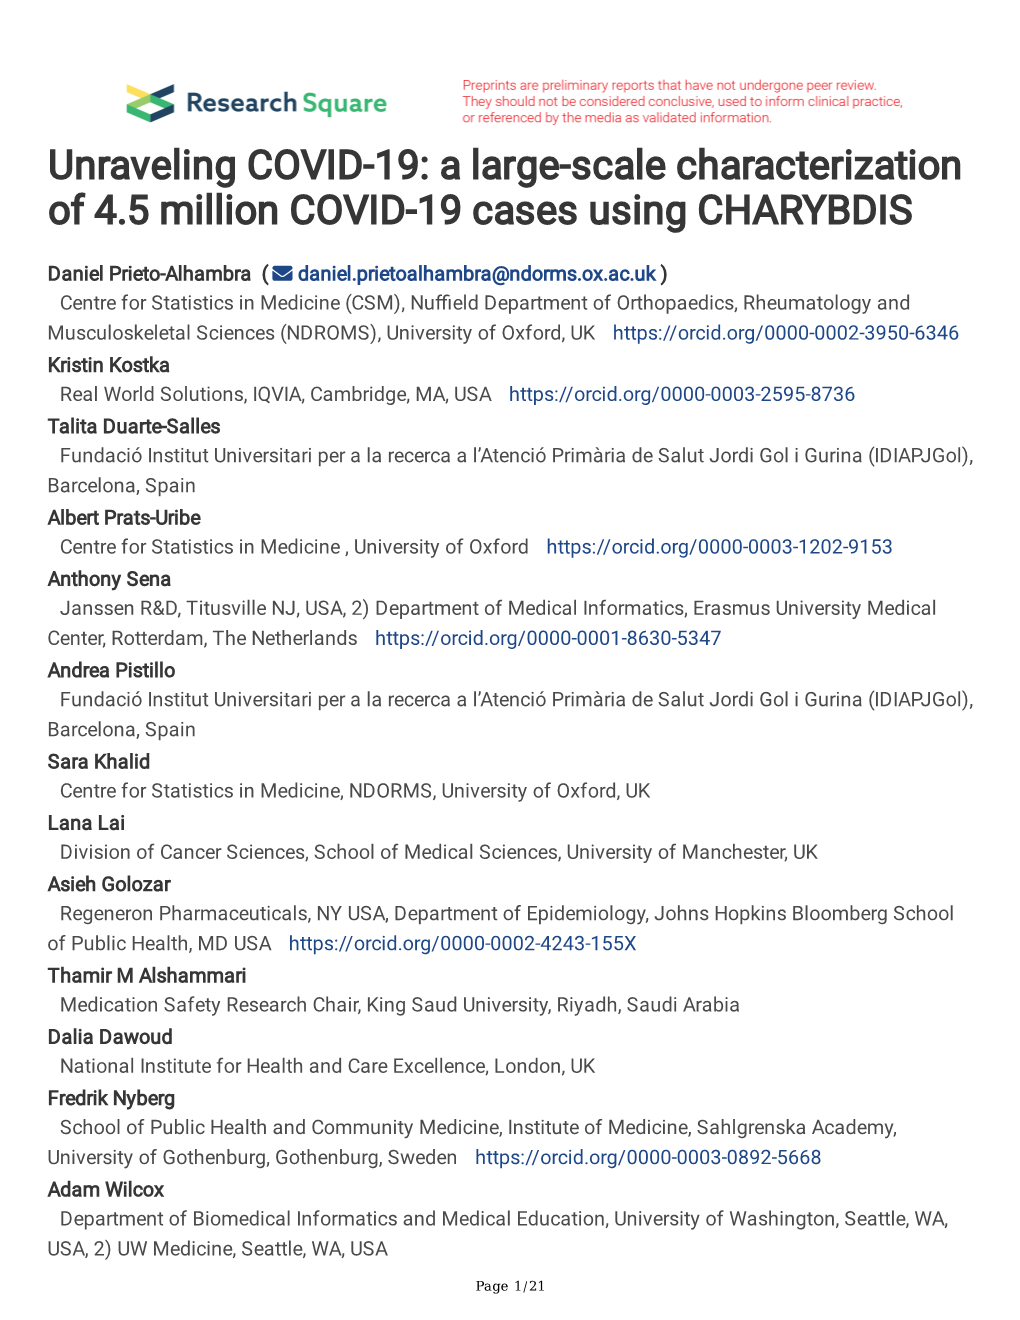 Unraveling COVID-19: a Large-Scale Characterization of 4.5 Million COVID-19 Cases Using CHARYBDIS